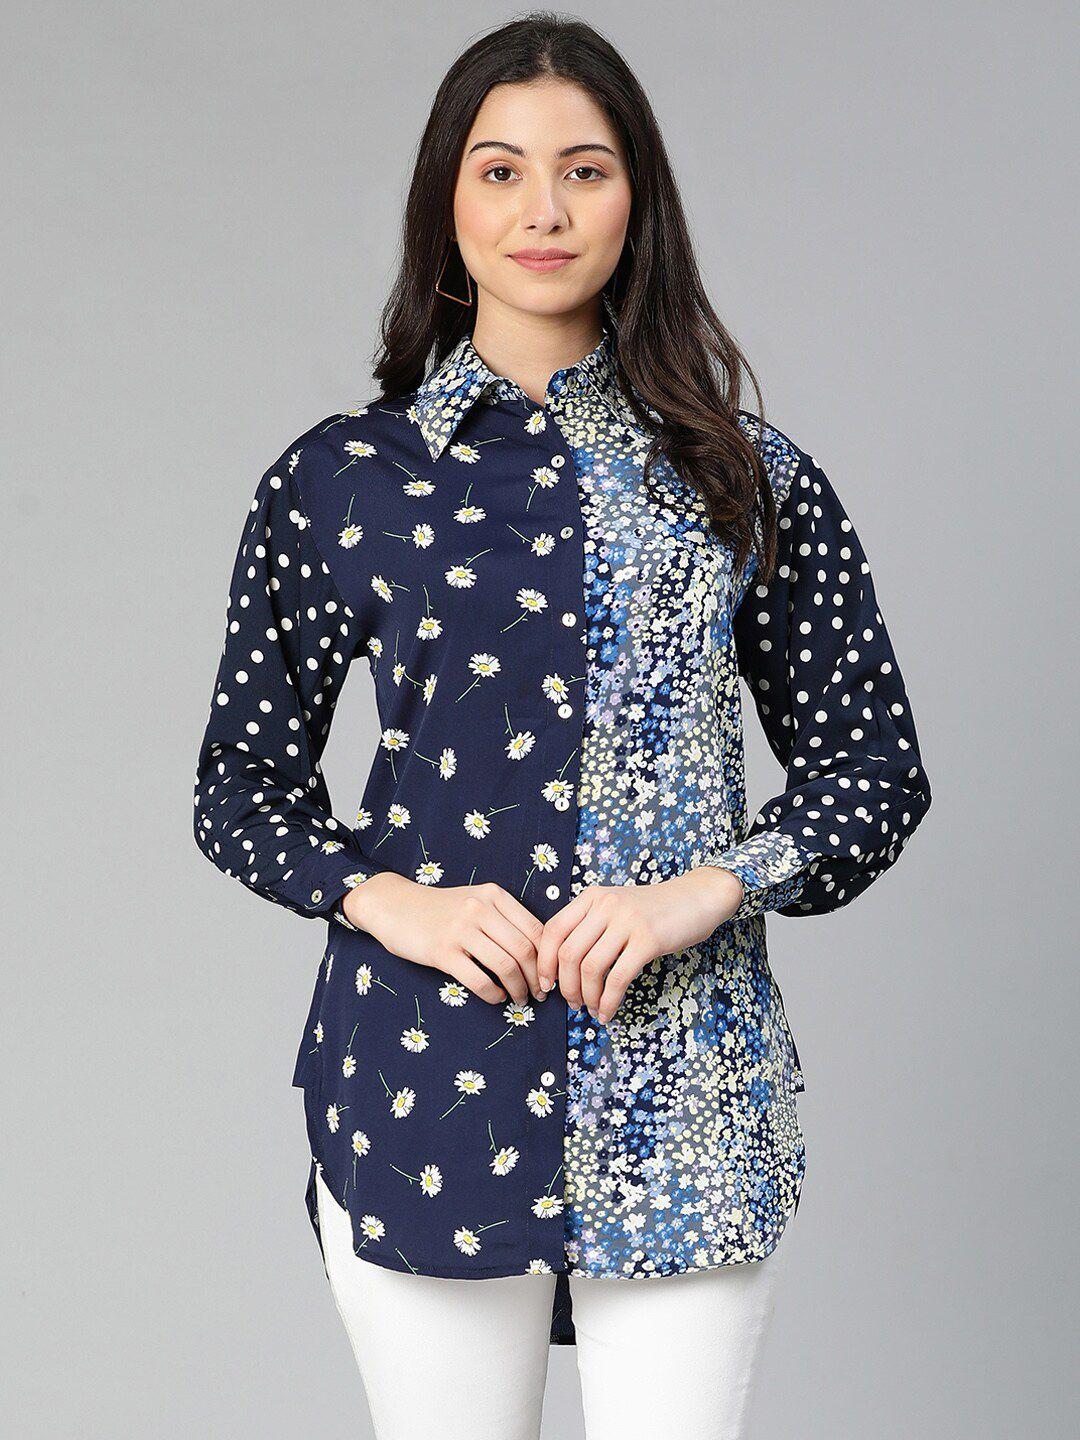 oxolloxo women navy blue standard floral printed casual shirt